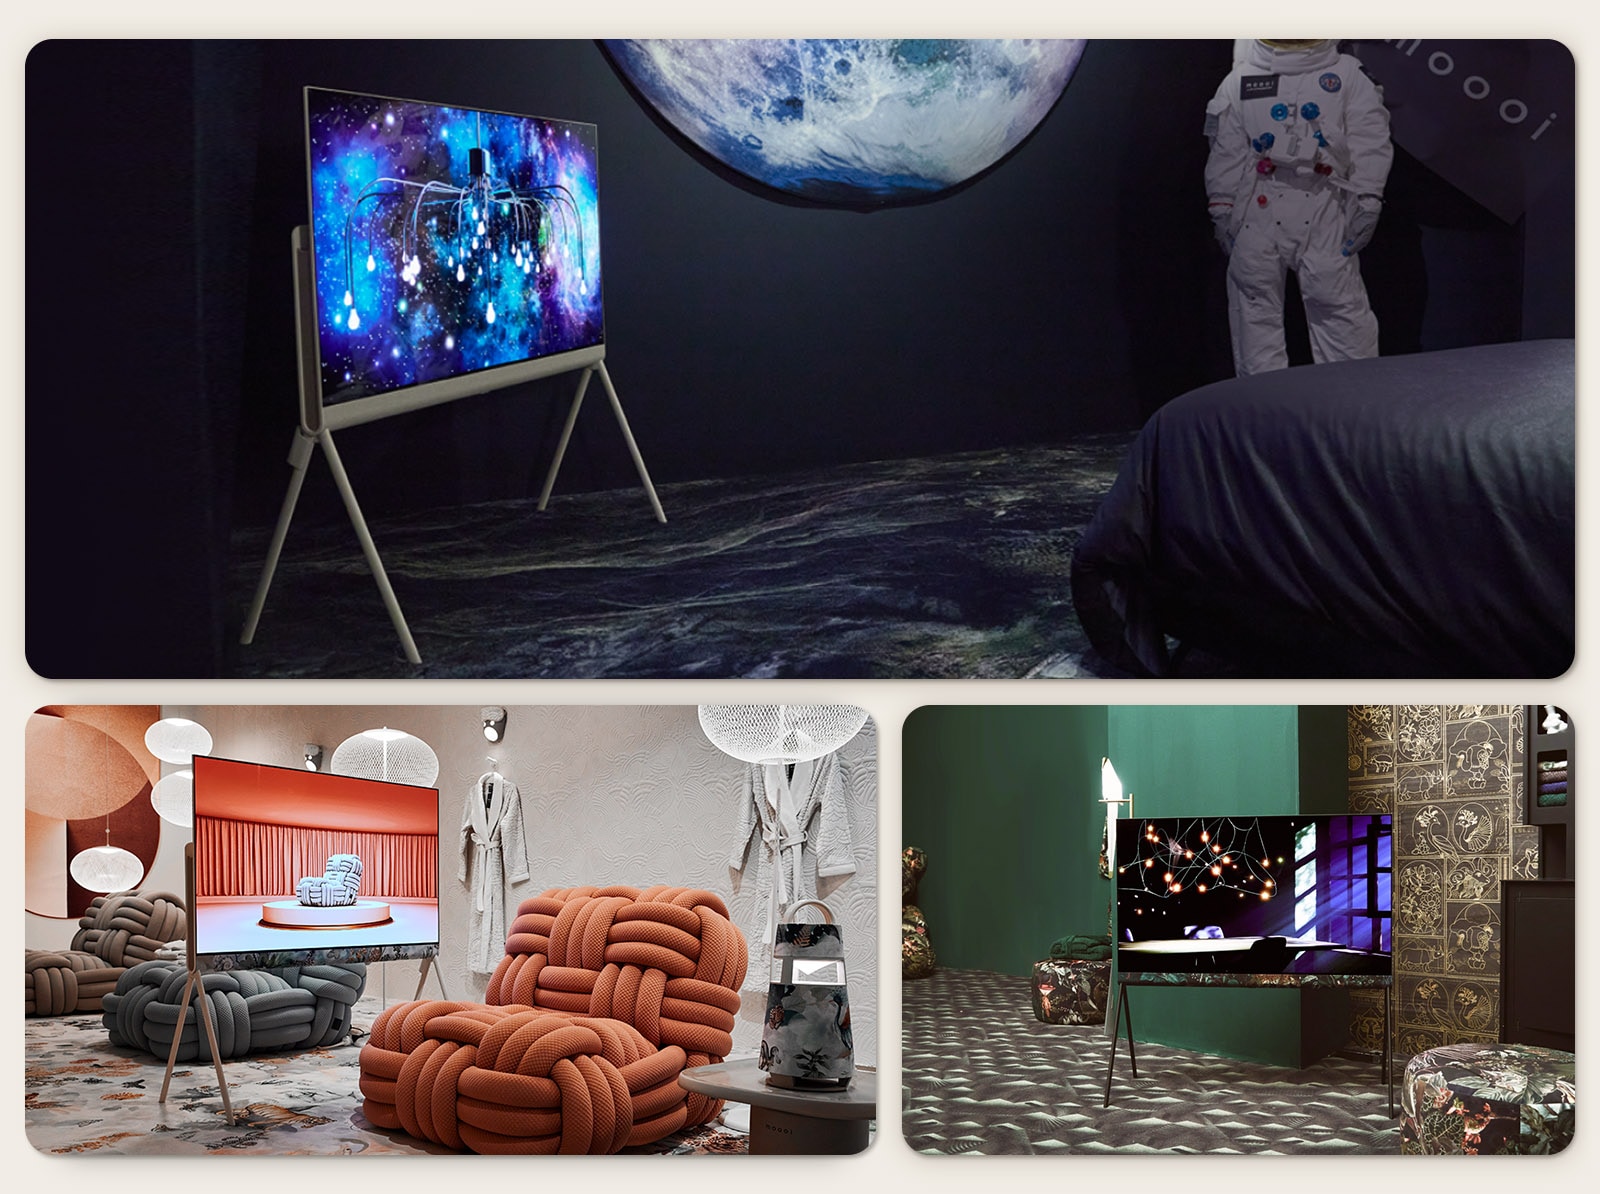 LG OLED Posé is in a black space-themed room with an abstract intergalactic artwork on display. The room also has a picture of a moon and an astronaut.   LG OLED Posé is in a cream room with hints of colors. The room has terracotta and charcoal-colored chunky woven sofa chairs, white ball-shaped light fixtures, and bathing robes hanging on the wall. The TV shows an image of the same charcoal sofa chair on a platform in a terracotta-colored room.  LG OLED Posé is in an opulent emerald green room. The TV shows light casting over a table through windowpanes on the screen. The room also features black and gold ornate tiles and black floral patterned textile stools. 